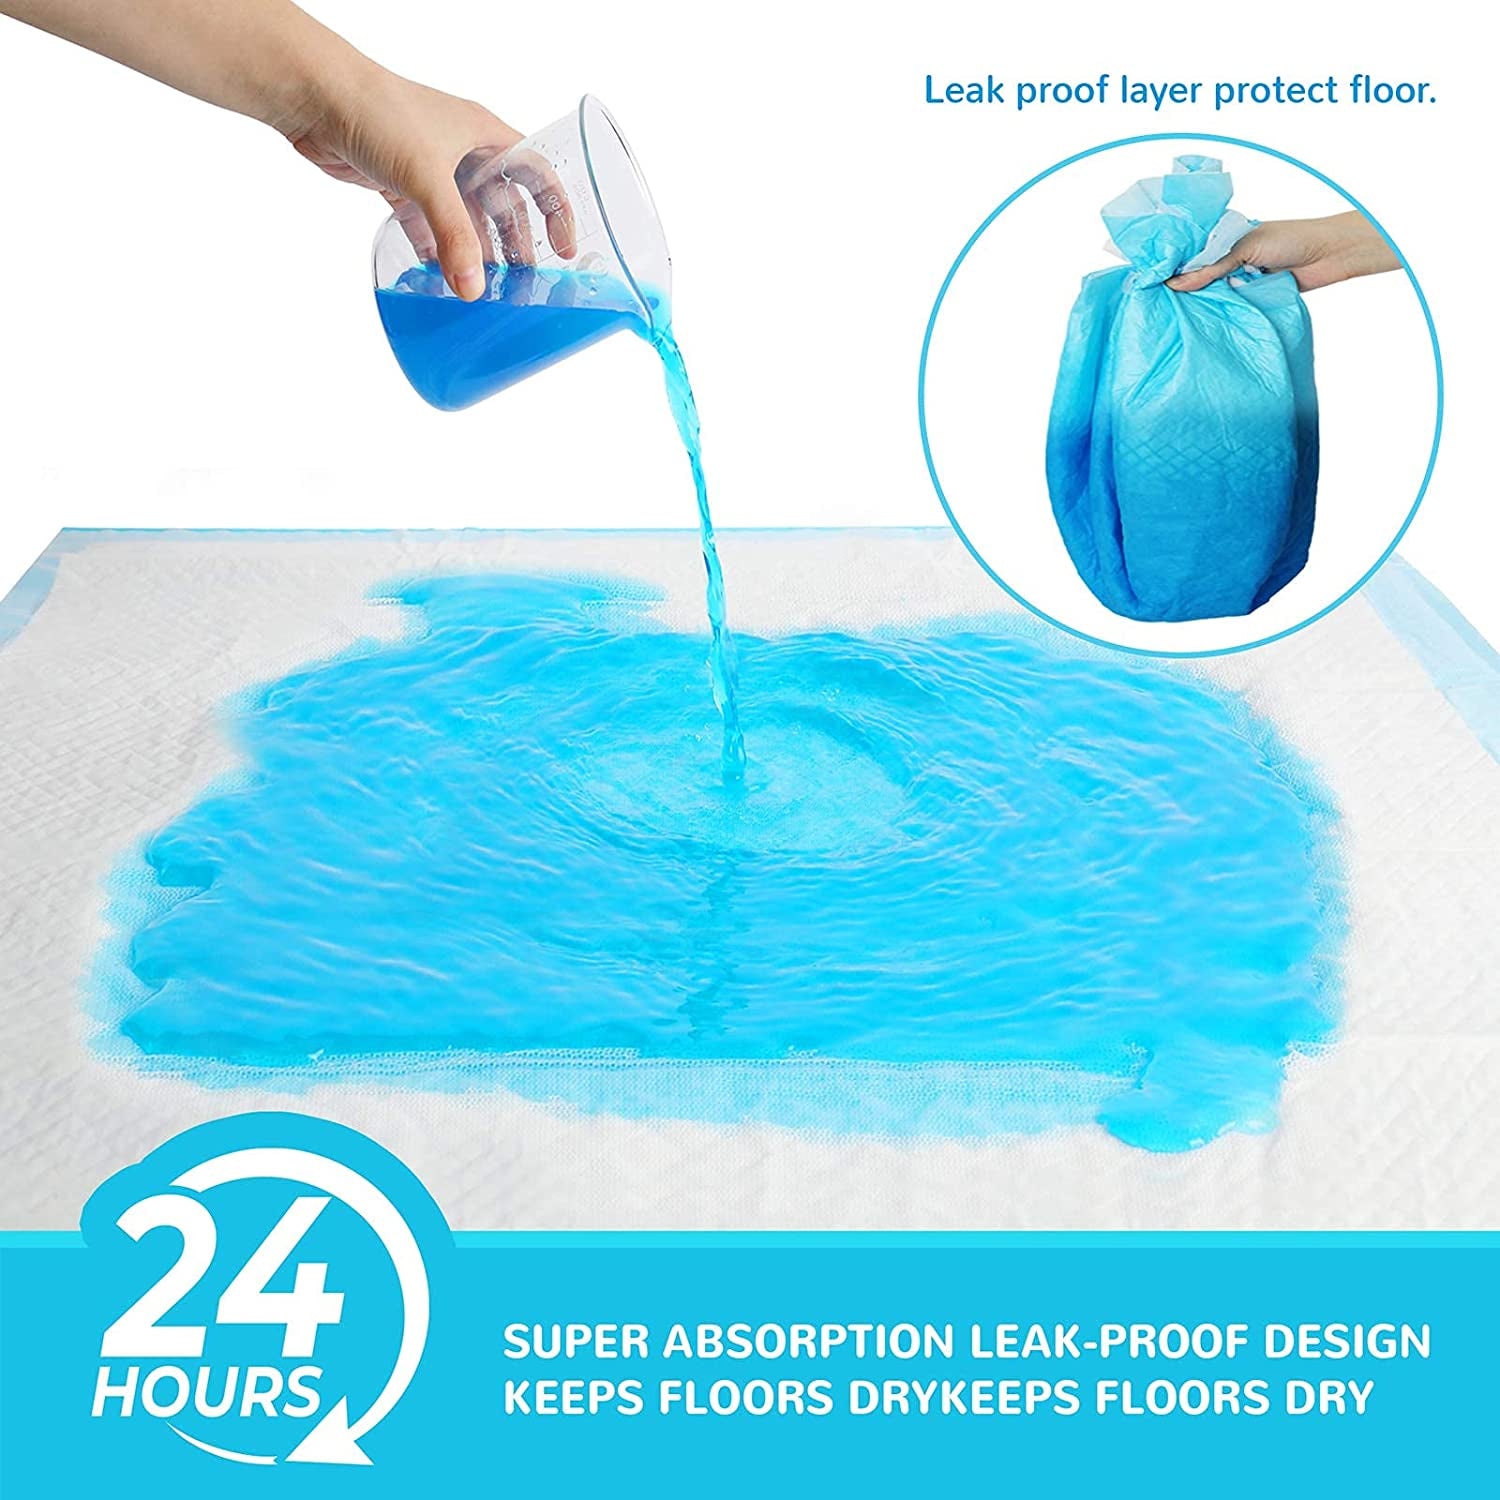 Extra Large Dog Pee Pads, Thicker Design for Super Absorbent and Leak Proof Pads, Disposable Potty Training Pads for Dogs, Puppy Pads XL, 28X34 Inches(120-Count, Blue)